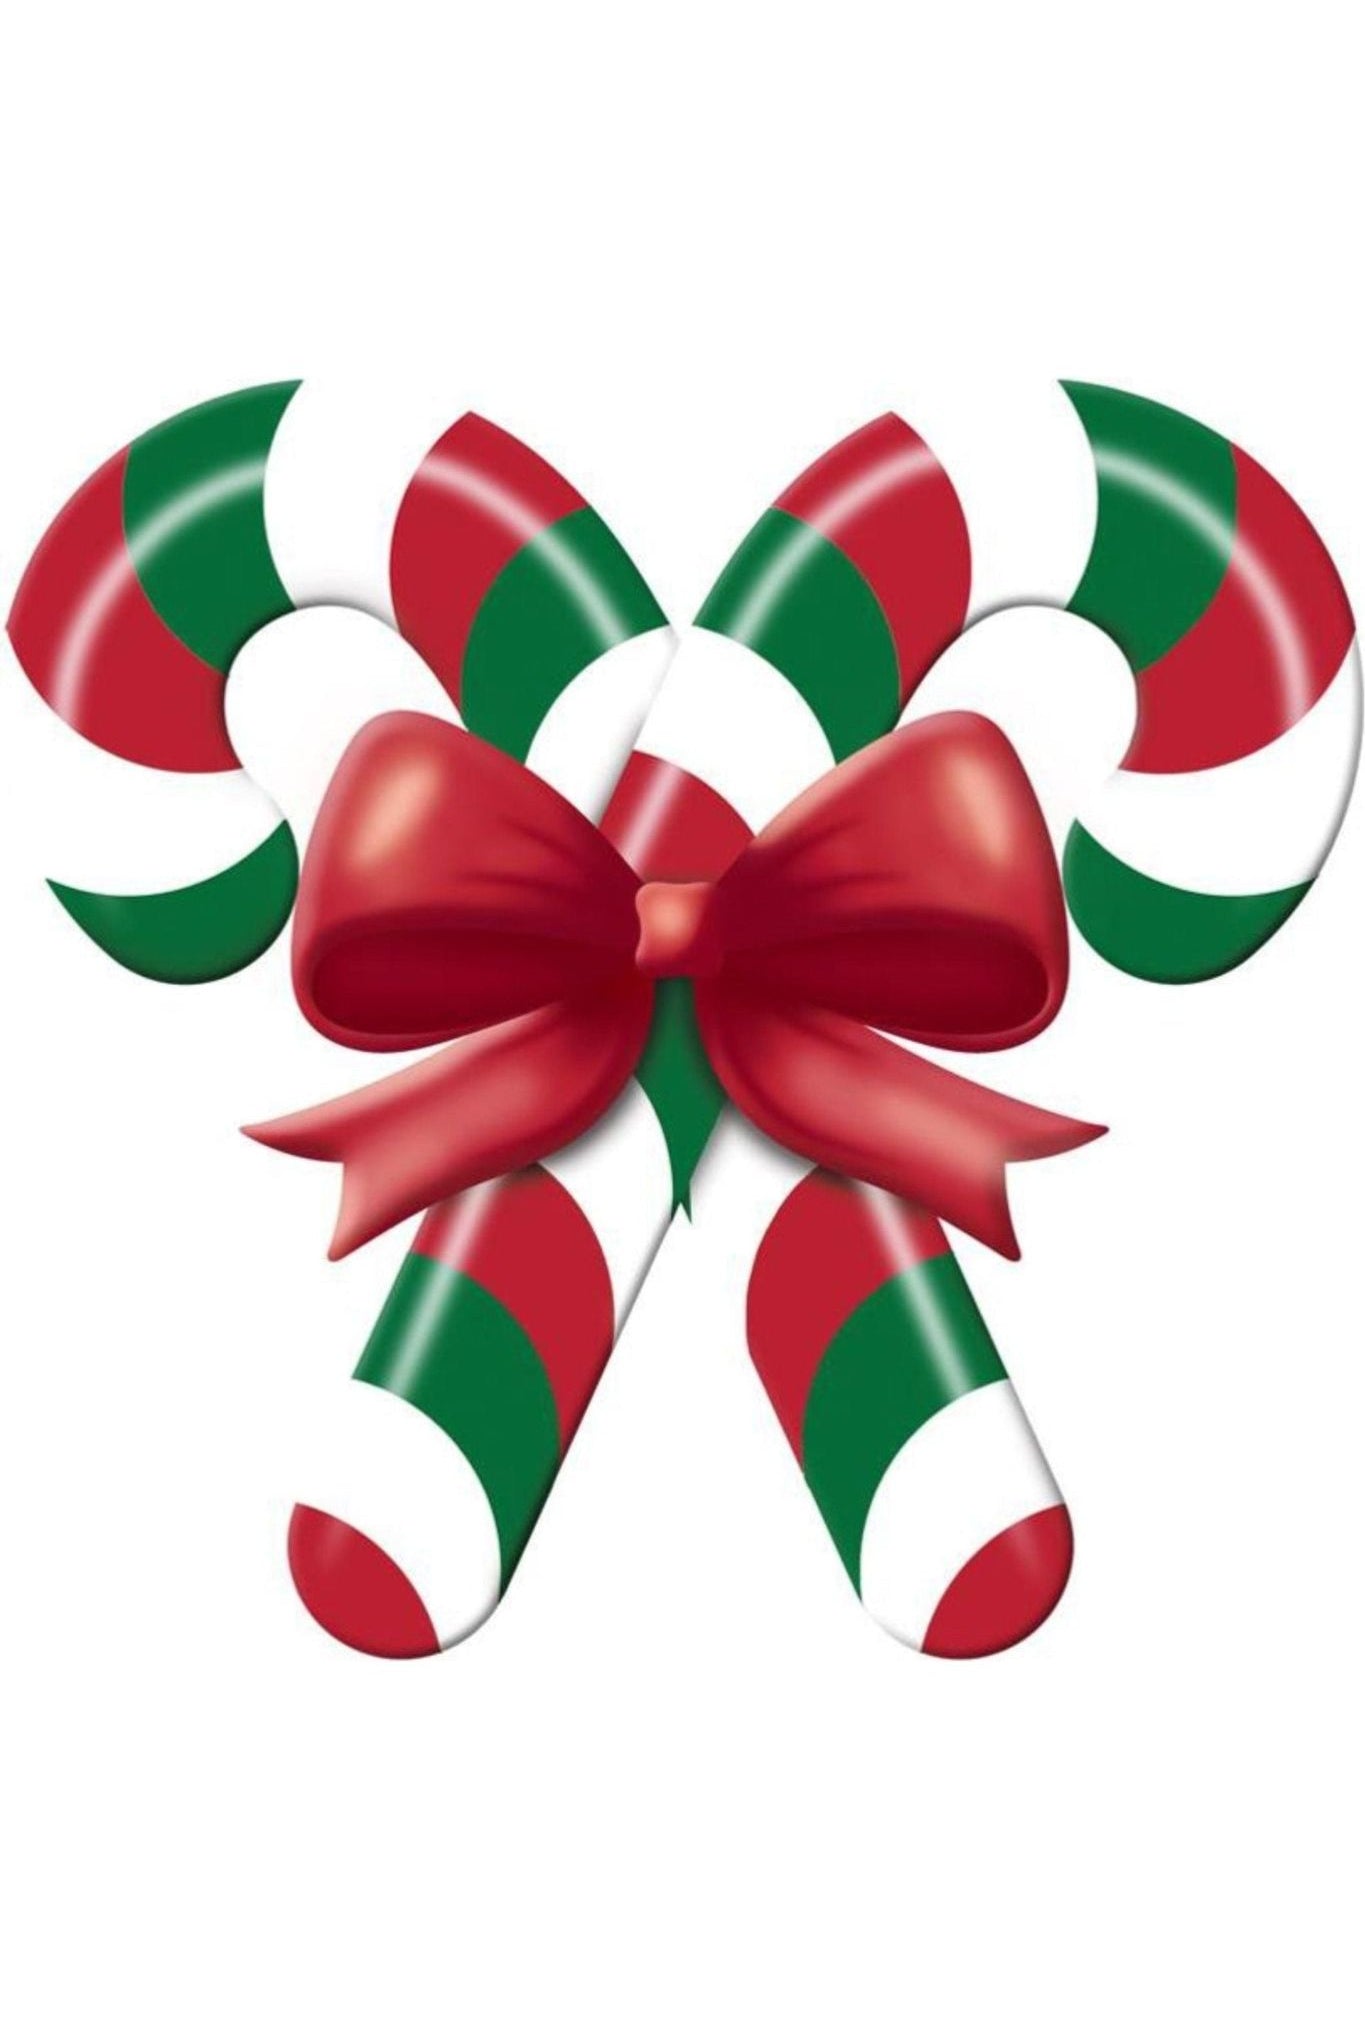 Shop For 13" Metal Embossed Candy Canes: Red/Green MD136583